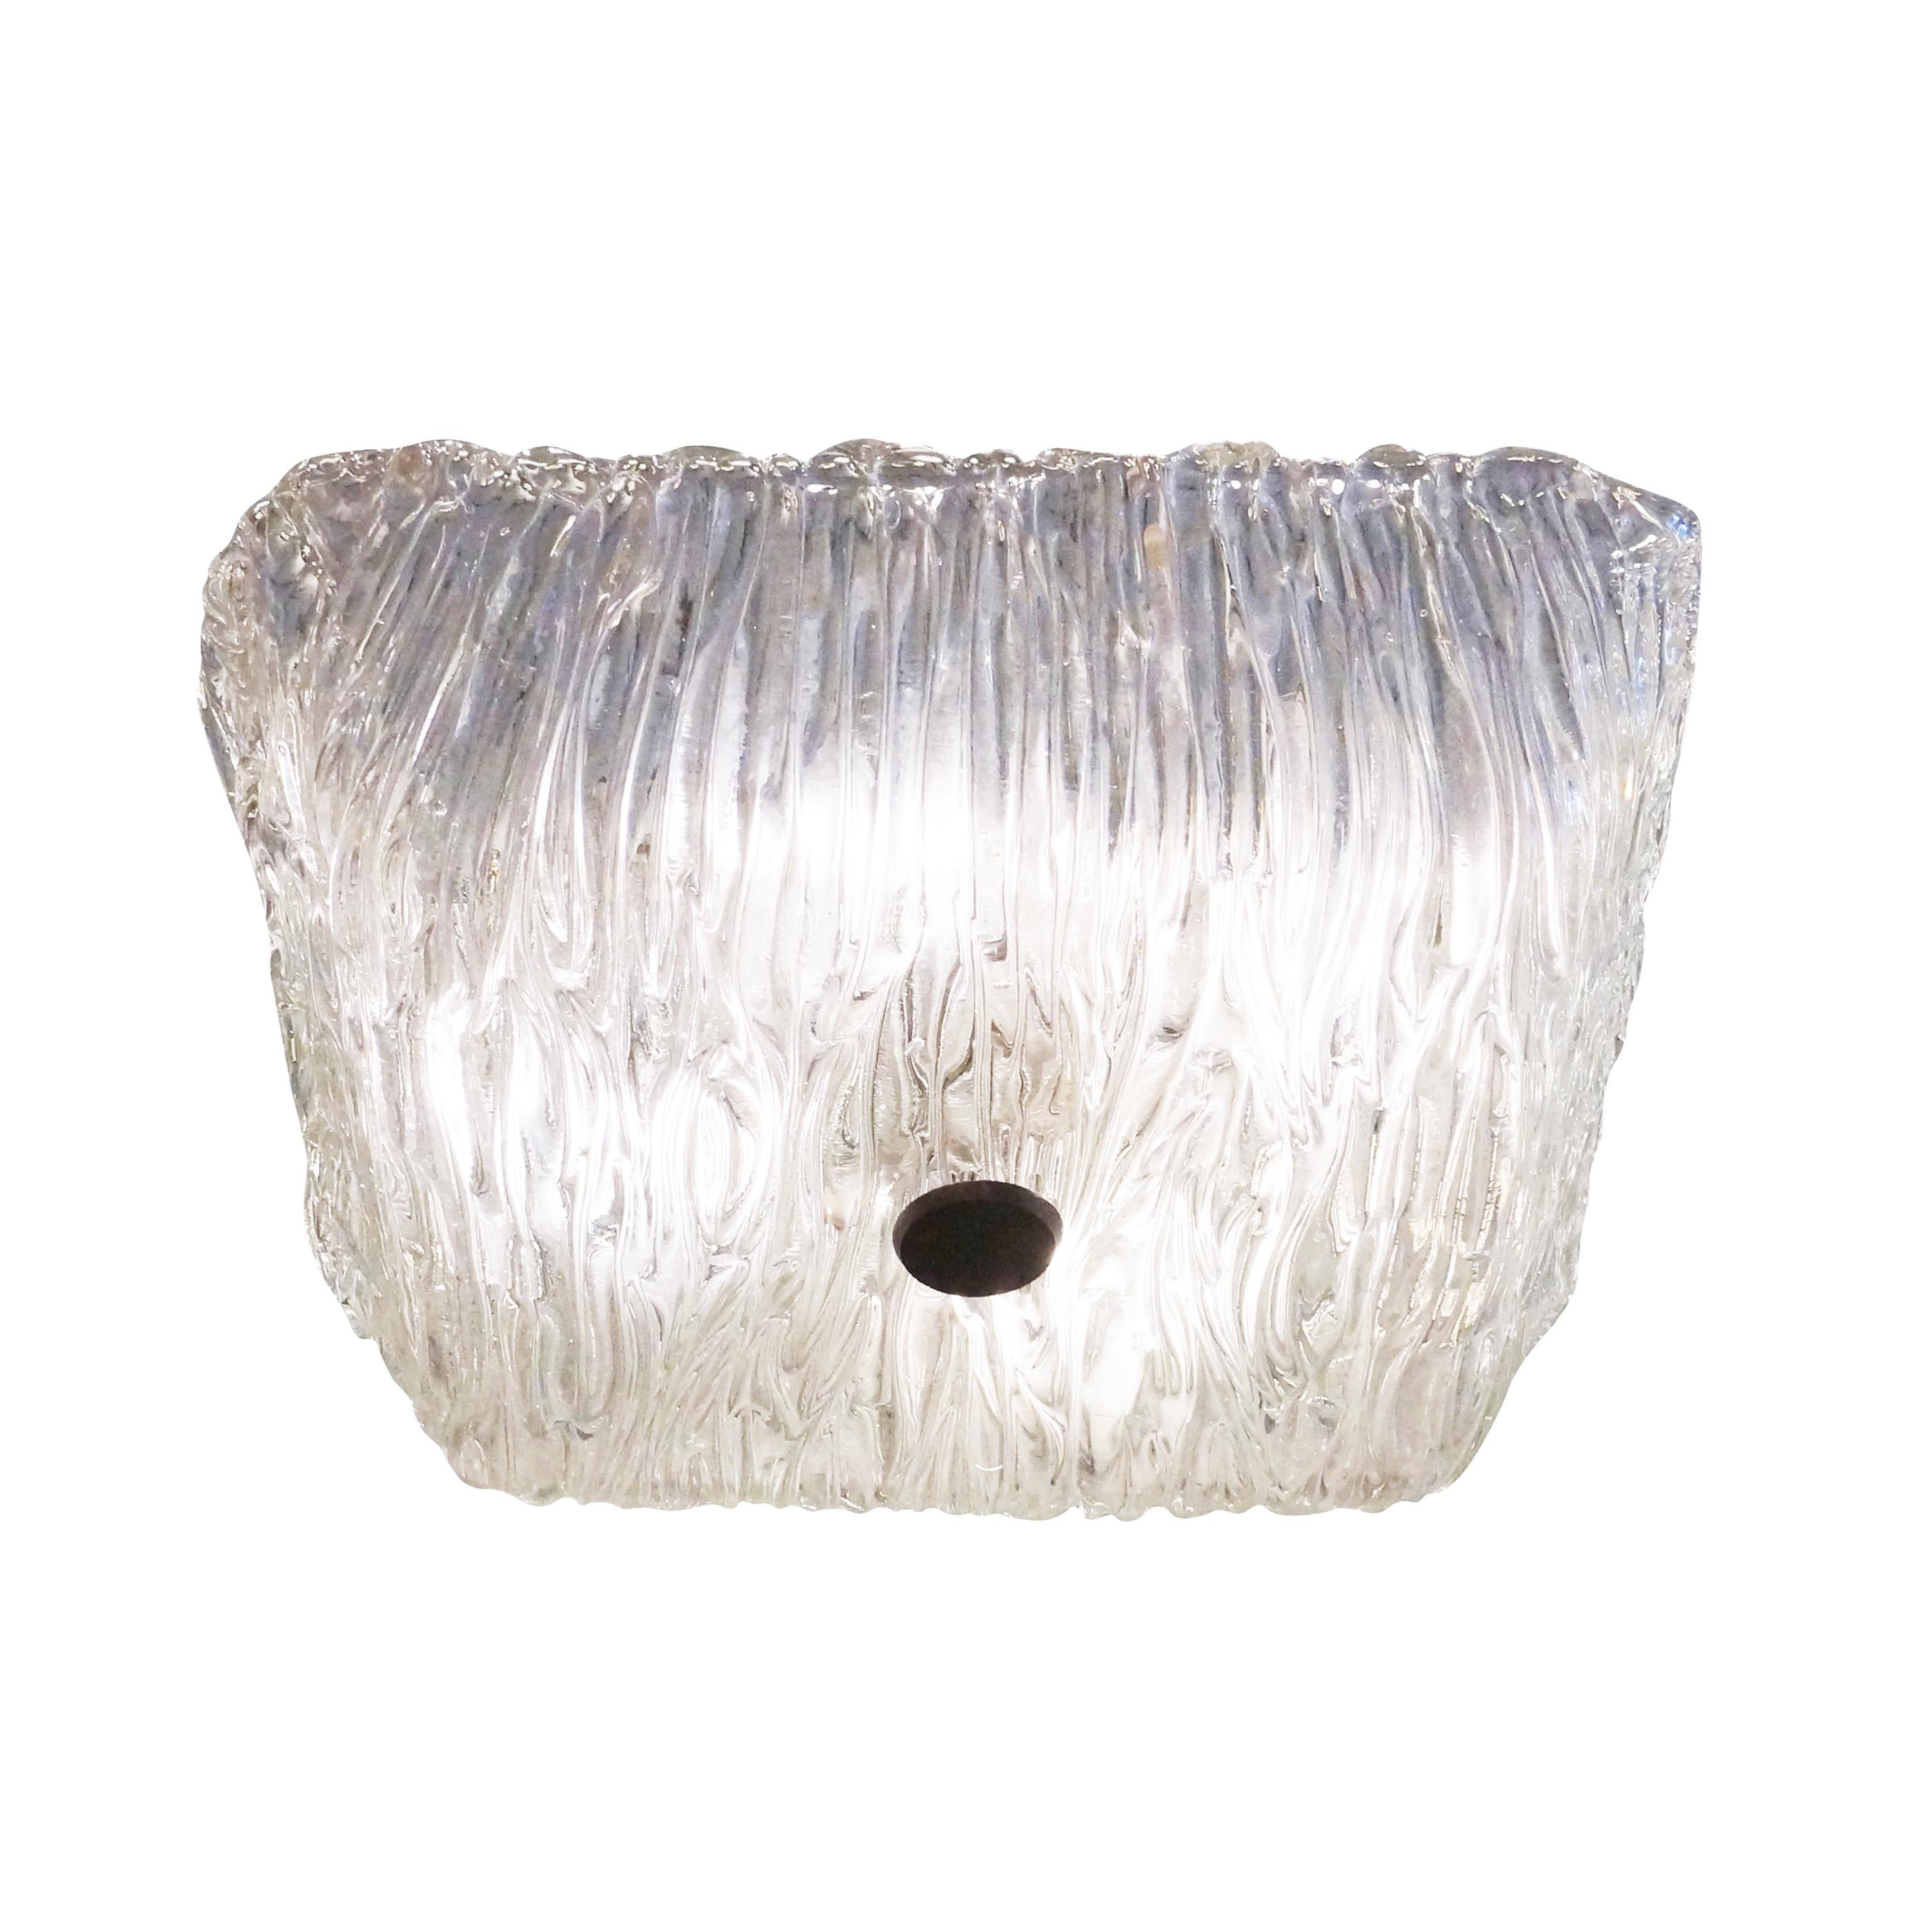 Textured square Murano Glass Flushmount designed by Toni Zuccheri for Venini in the 1960s. Brass Hardware. Holds four candelabra sockets.

Condition: Excellent vintage condition, minor wear consistent with age and use.

Width: 13”

Depth: